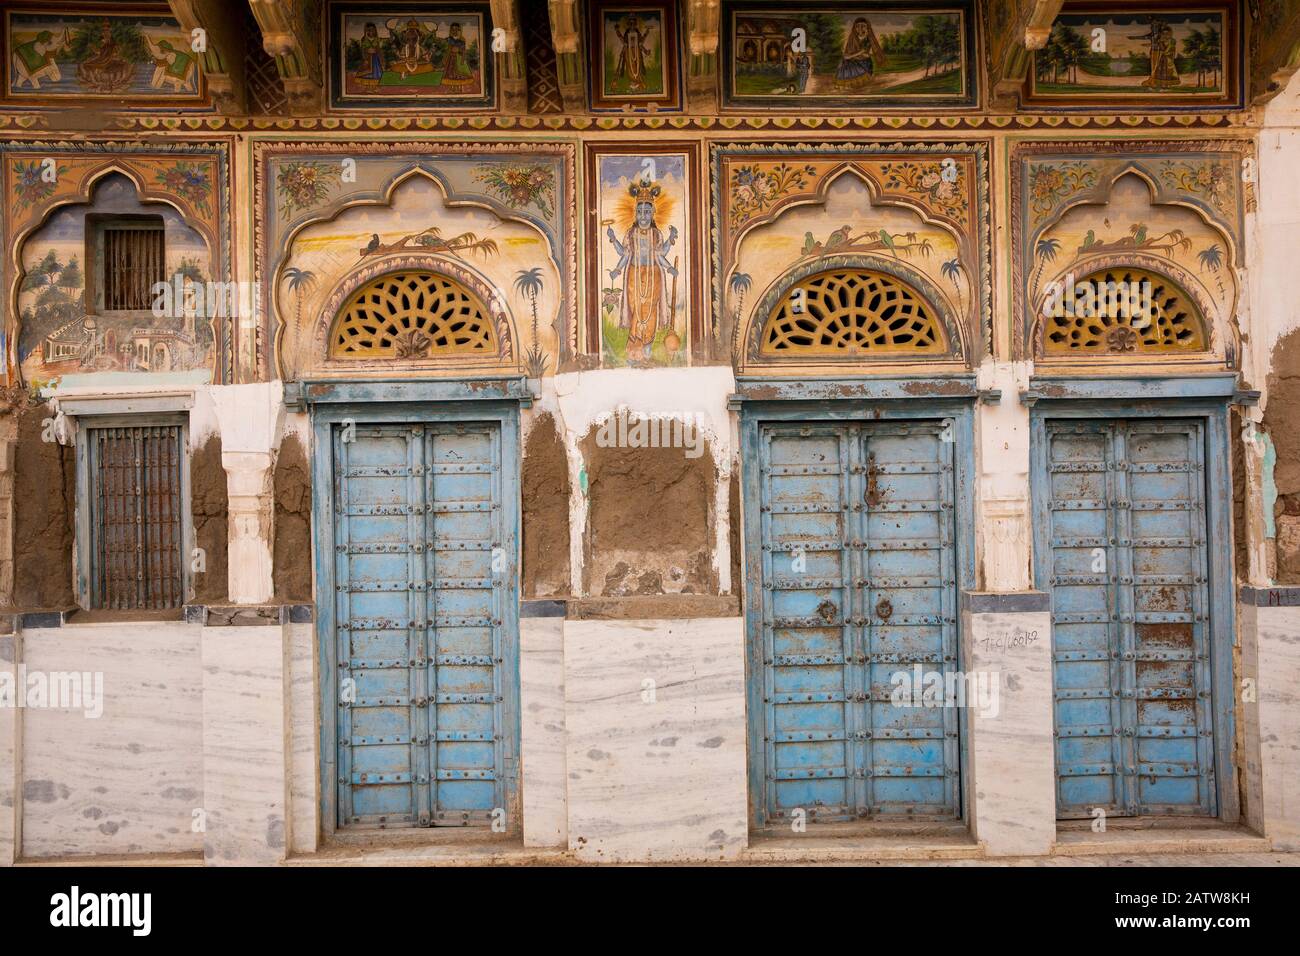 India, Rajasthan, Shekhawati, Ramgarh, blue painted doors of well-maintained old haveli, with lower decorative painted whitewashed over Stock Photo